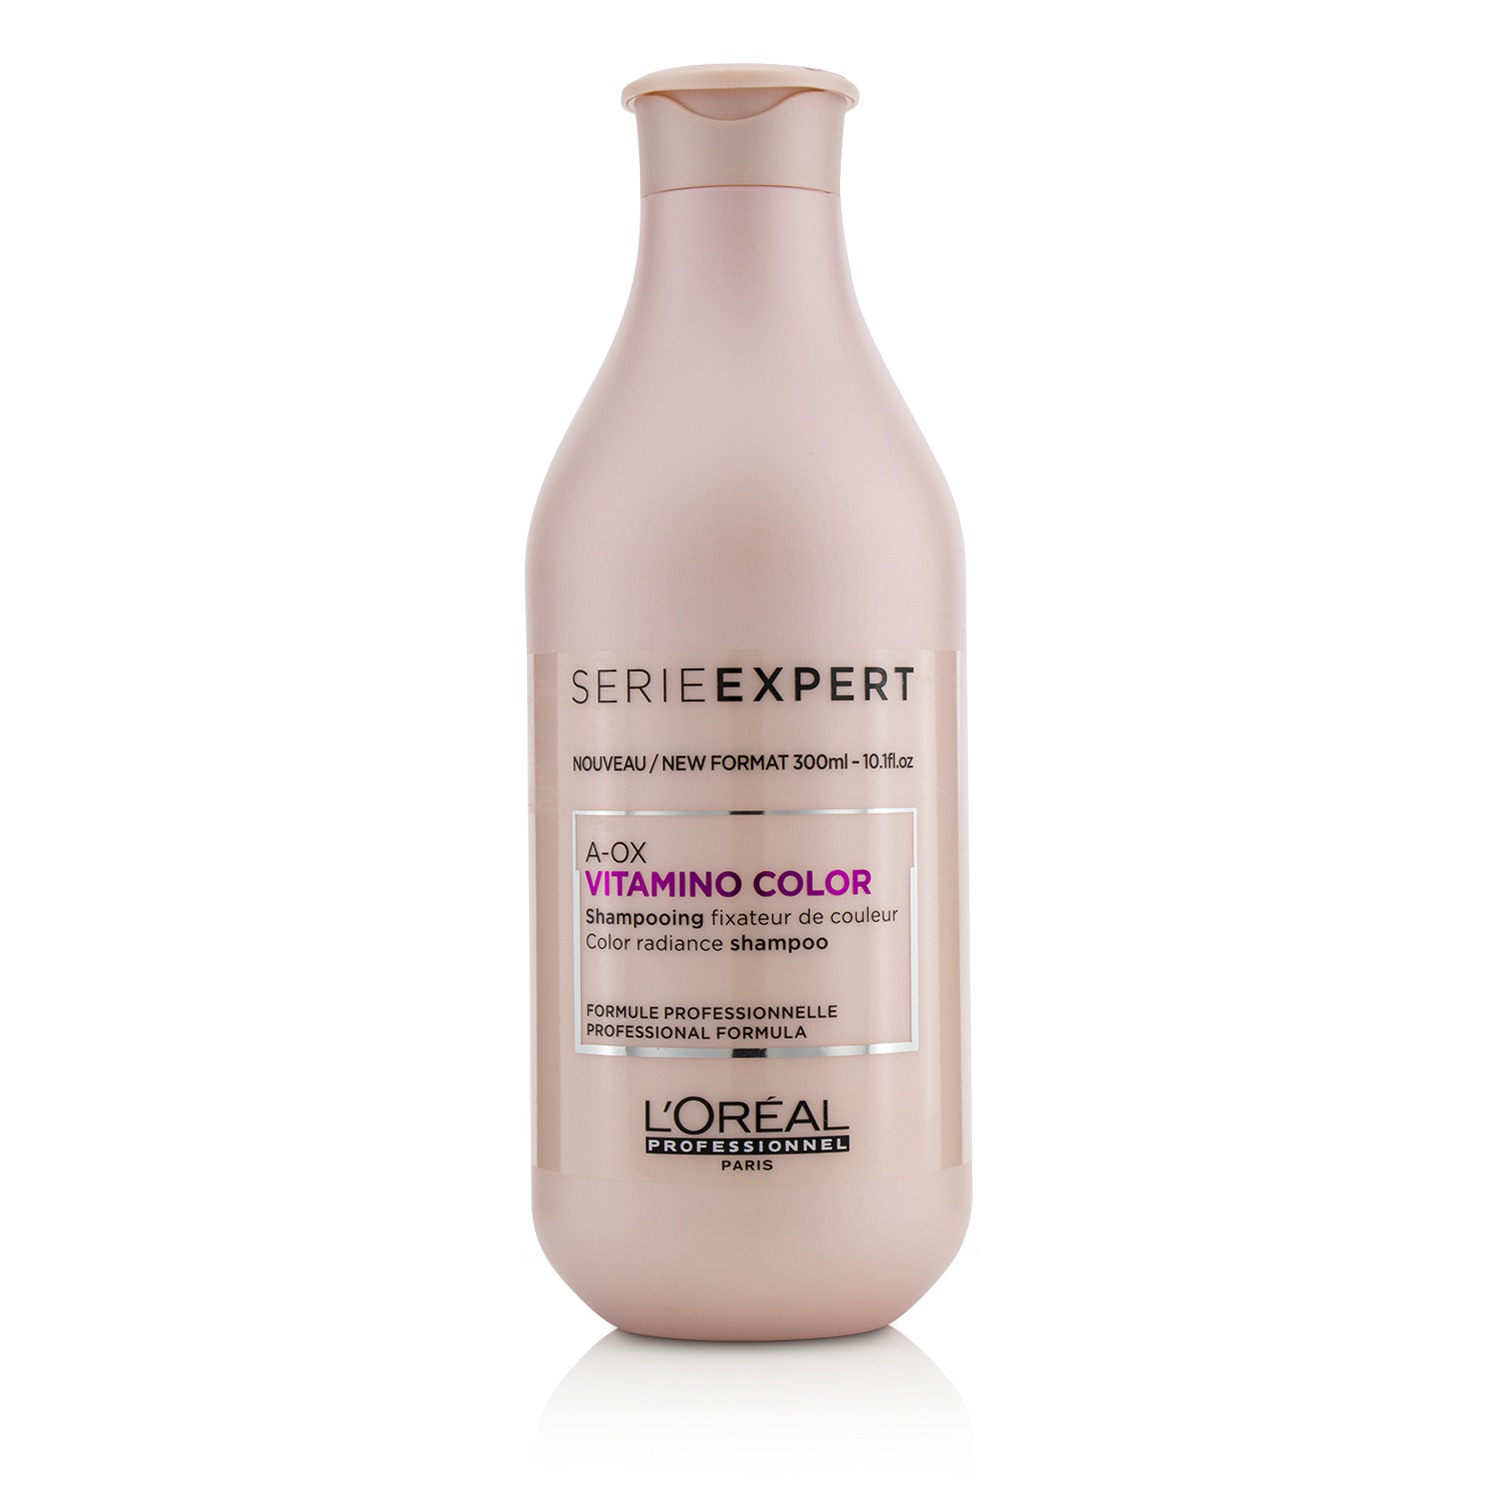 Professionnel Serie Expert - Vitamino Color A-OX Color Radiance Shampoo LOreal Image